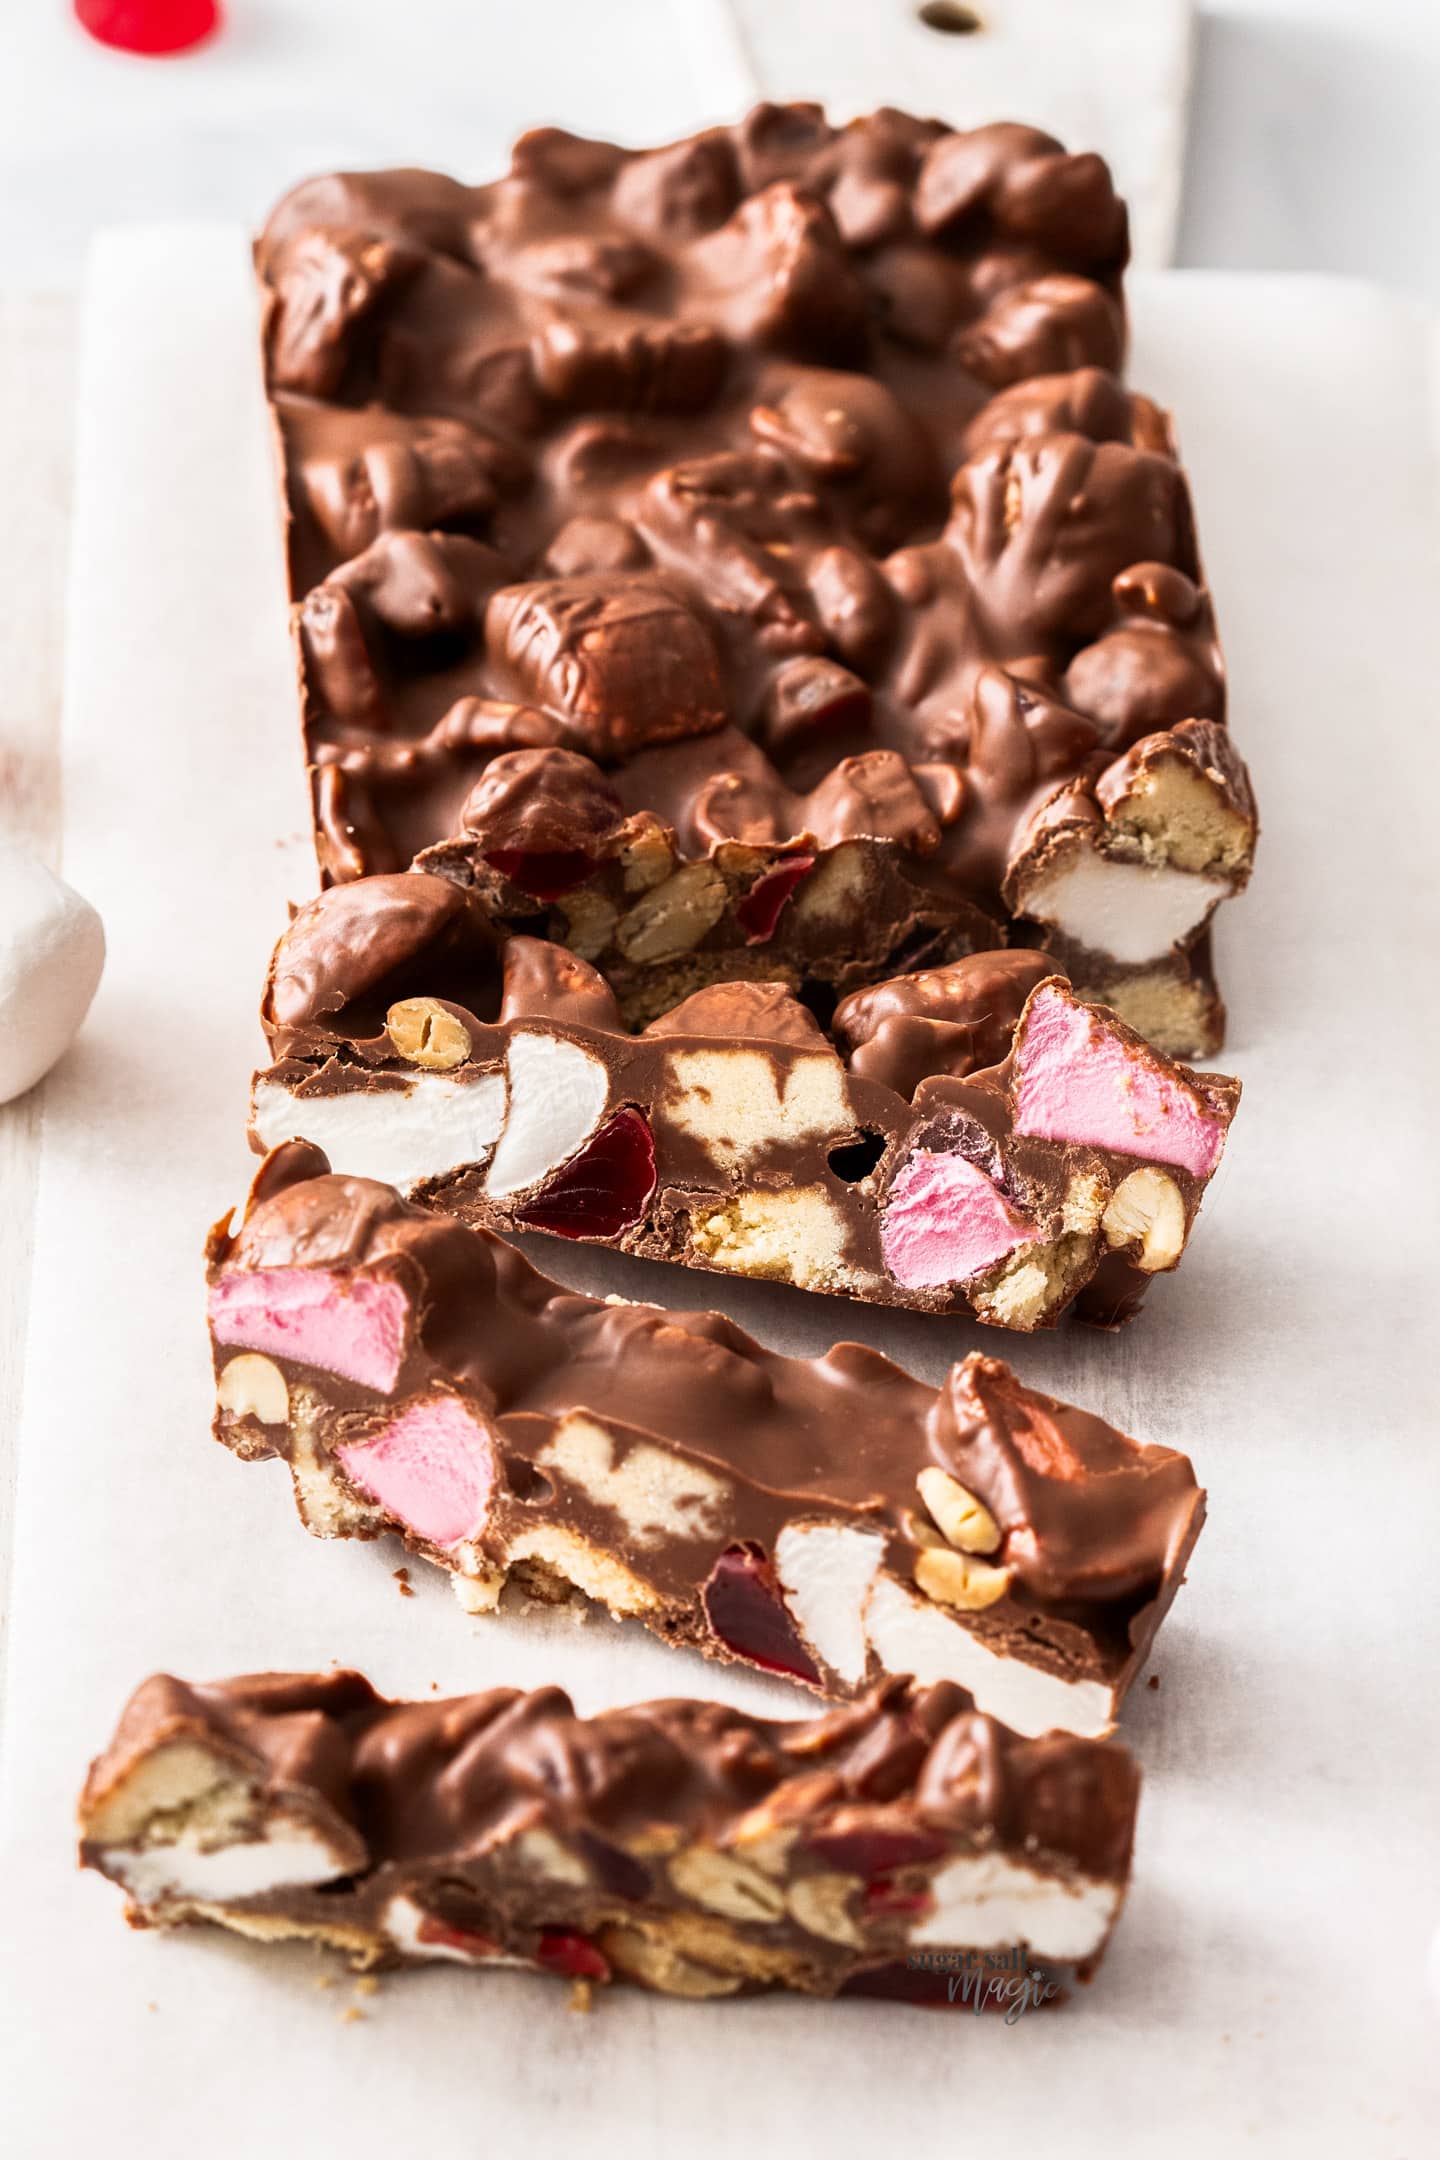 A batch of rocky road with 3 slices cut.